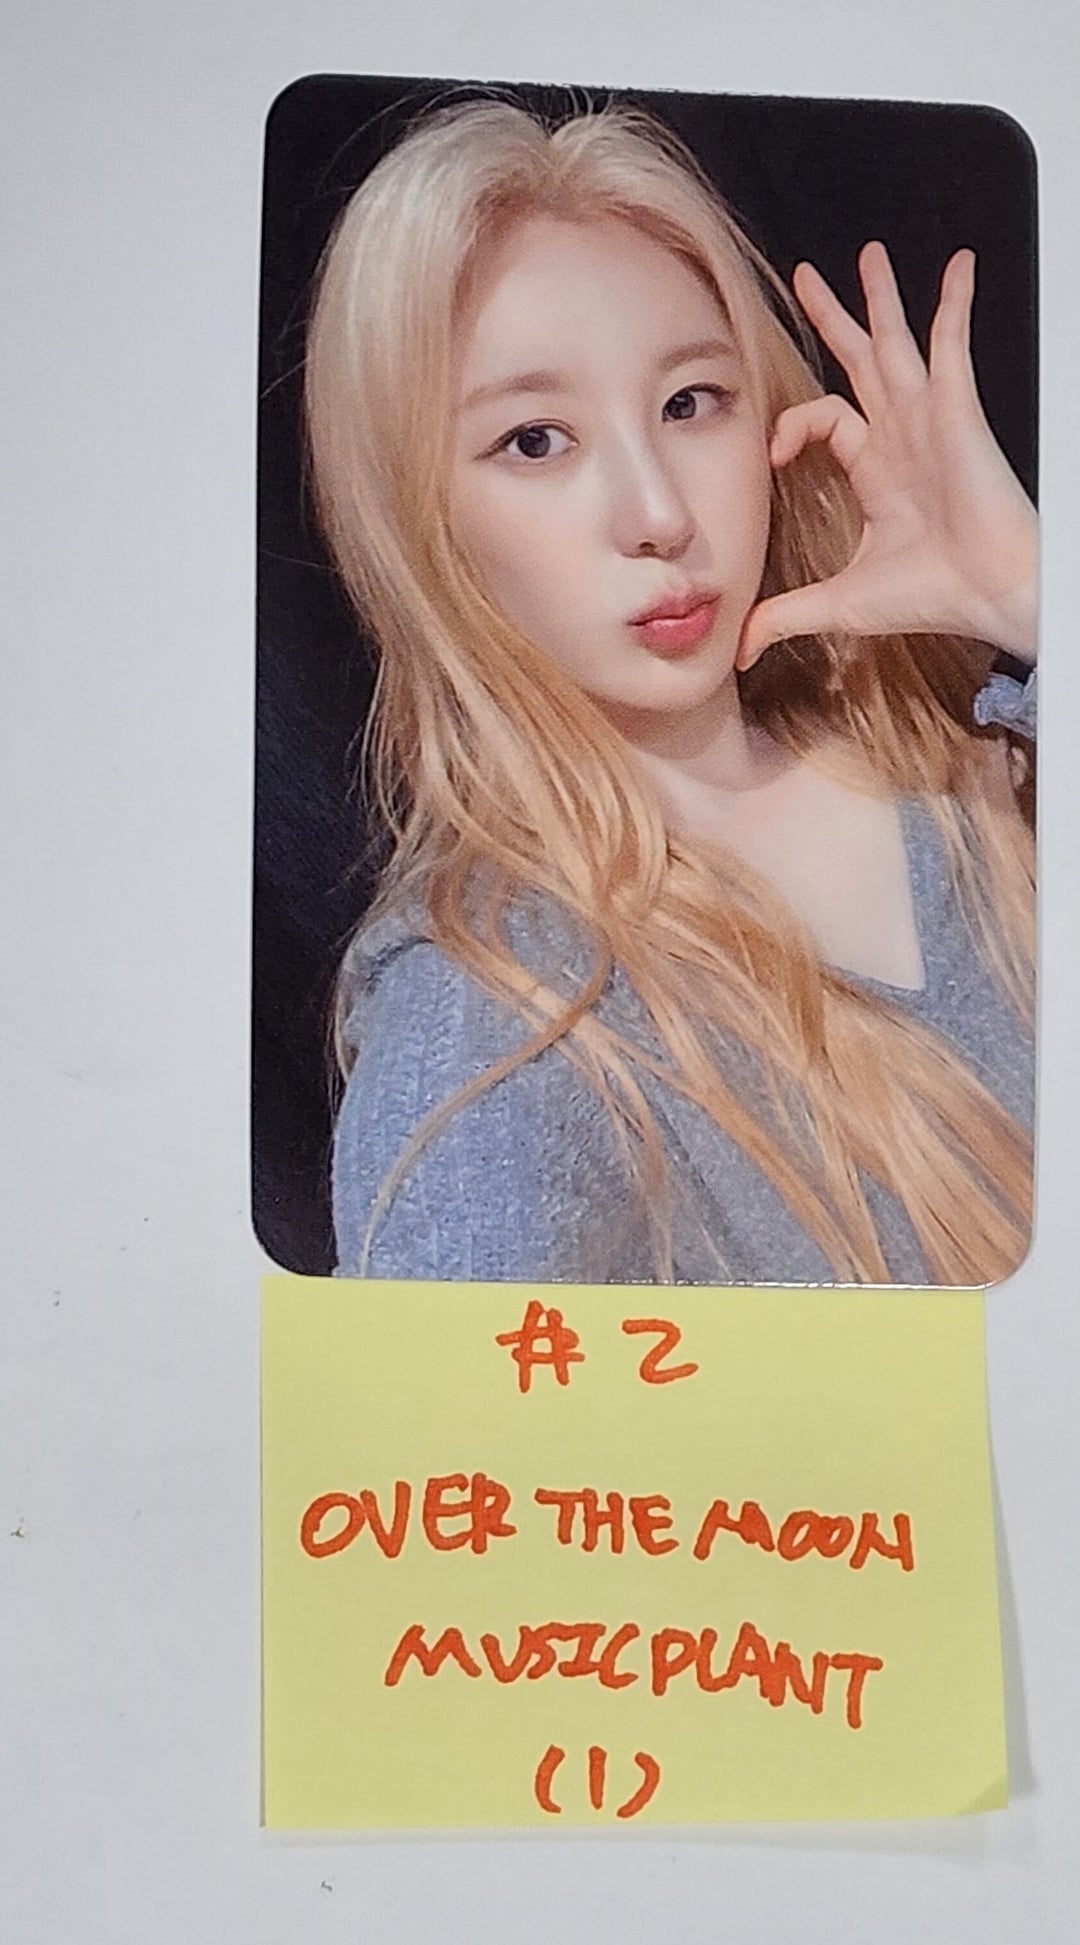 Lee Chae Yeon "Over The Moon" - Music Plant Fansign Event Photocard